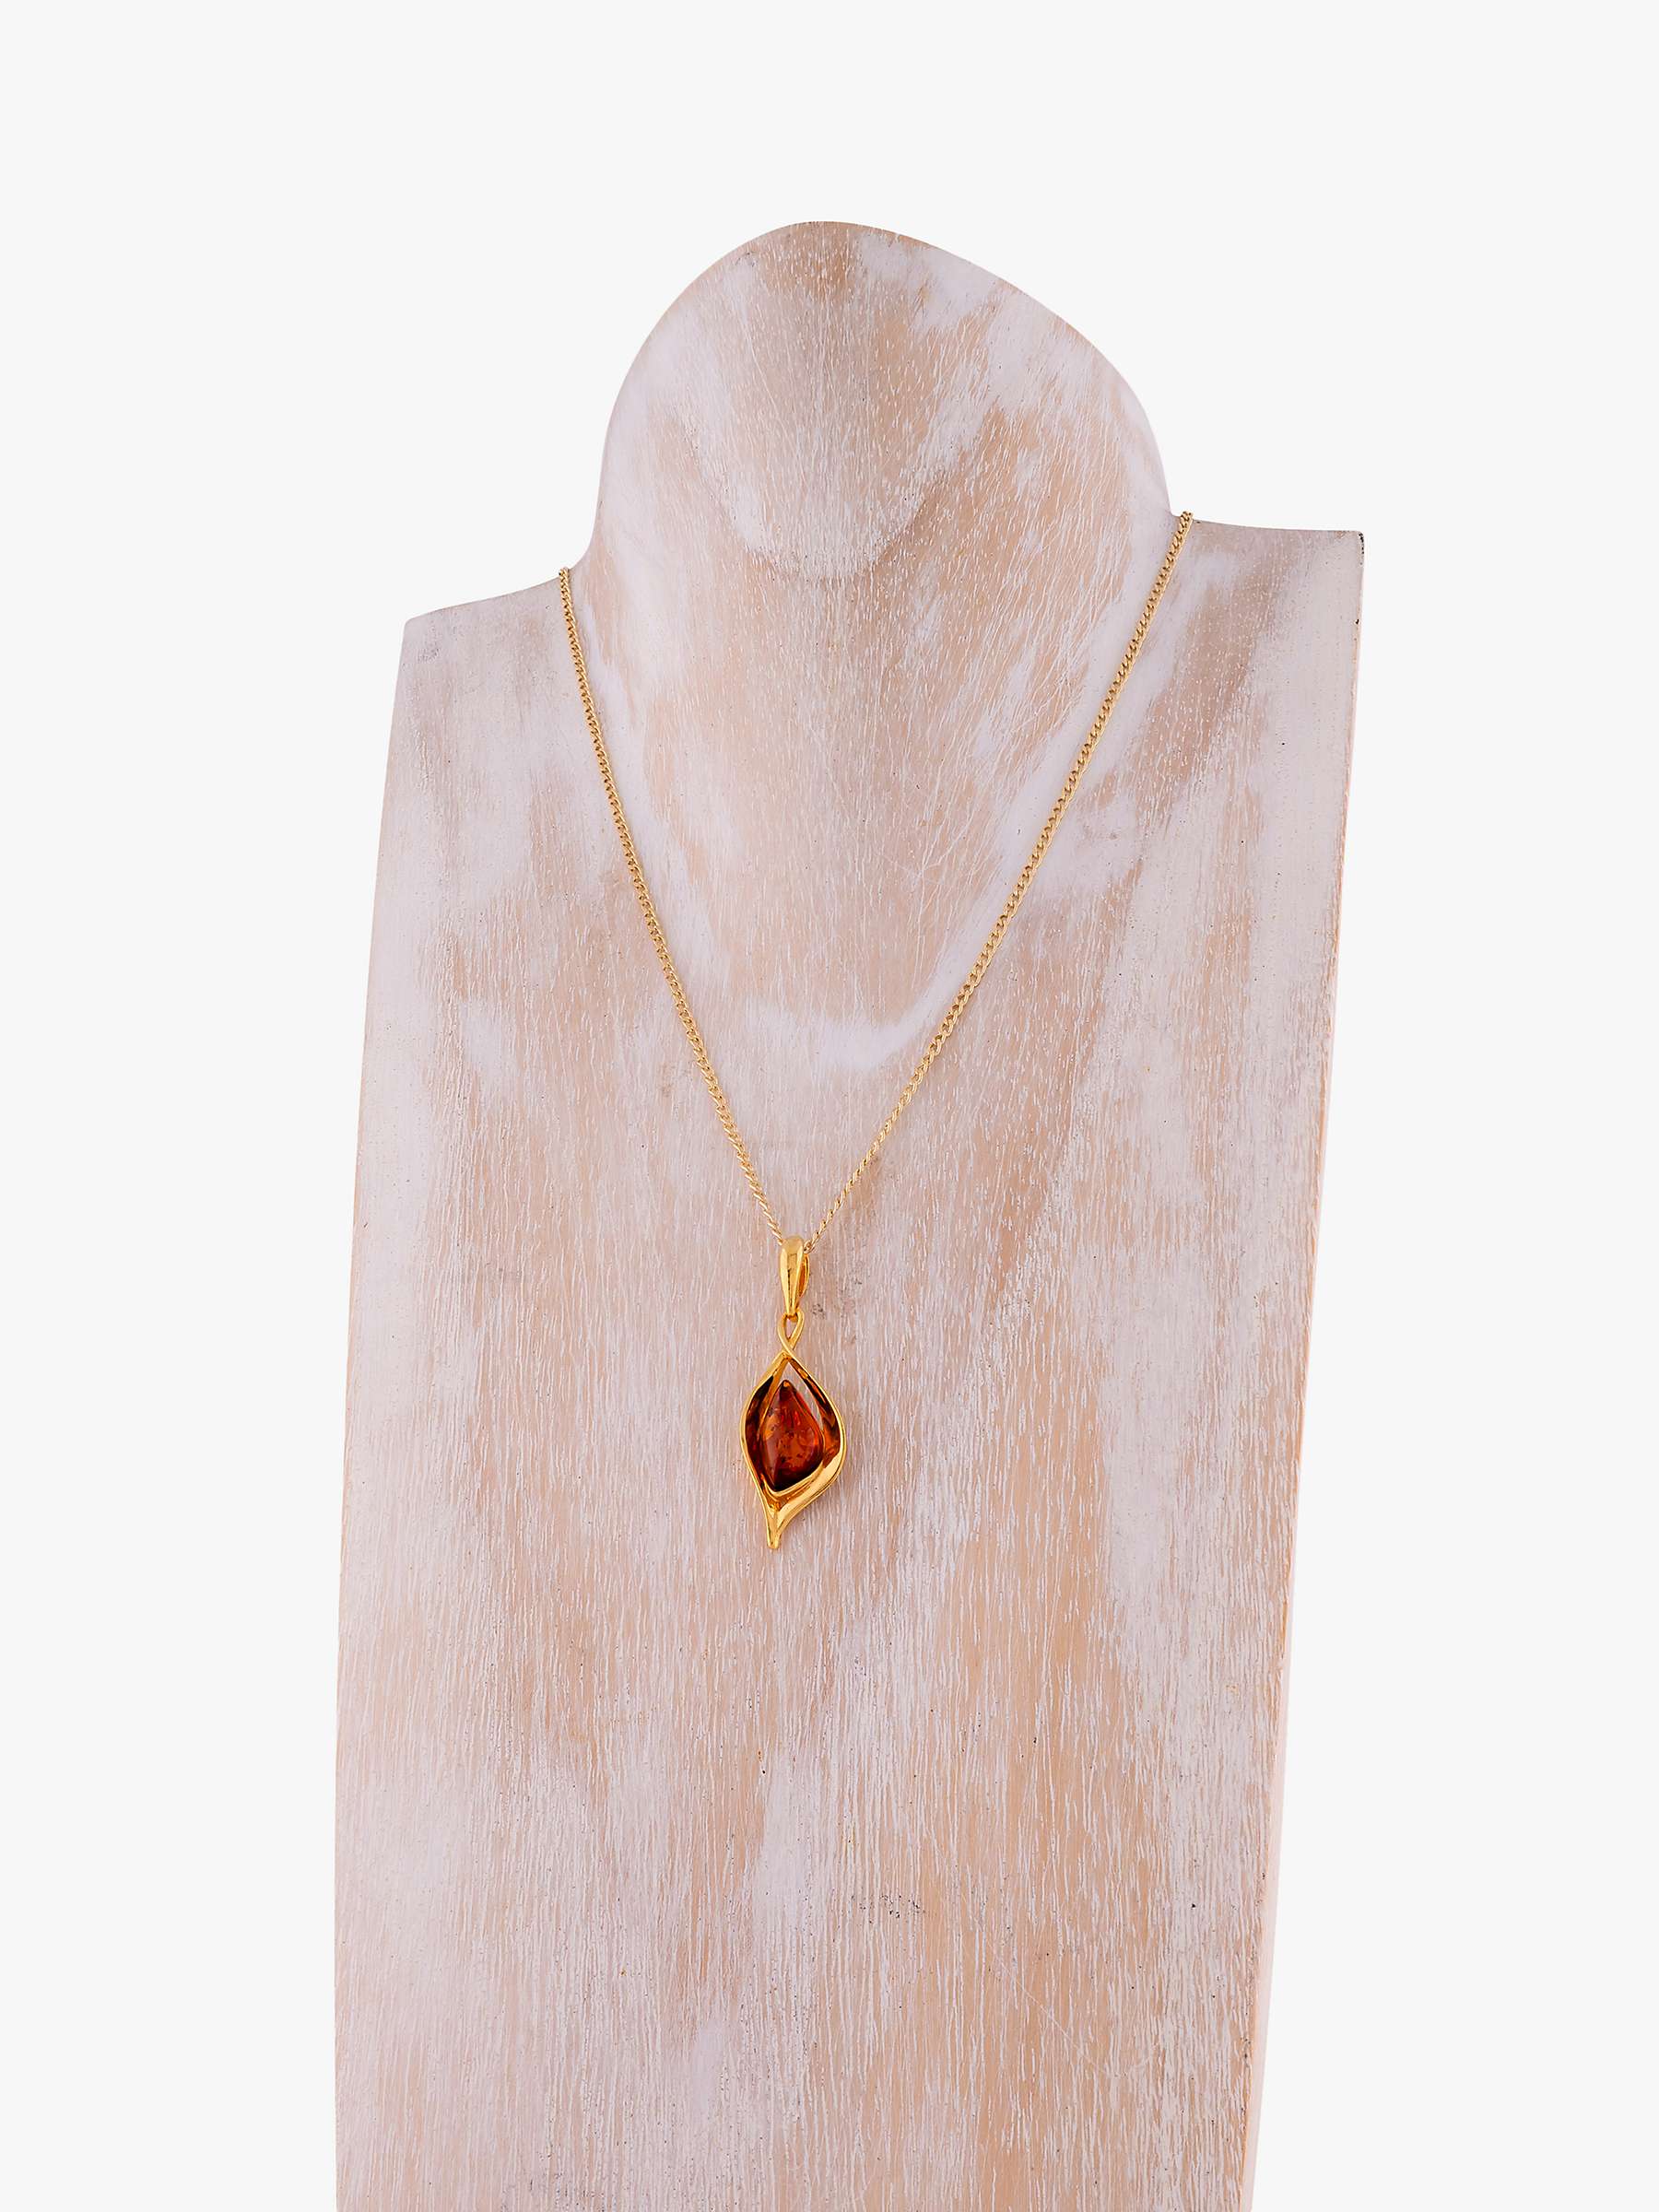 Buy Be-Jewelled Twist Amber Pendant Necklace, Gold/Cognac Online at johnlewis.com